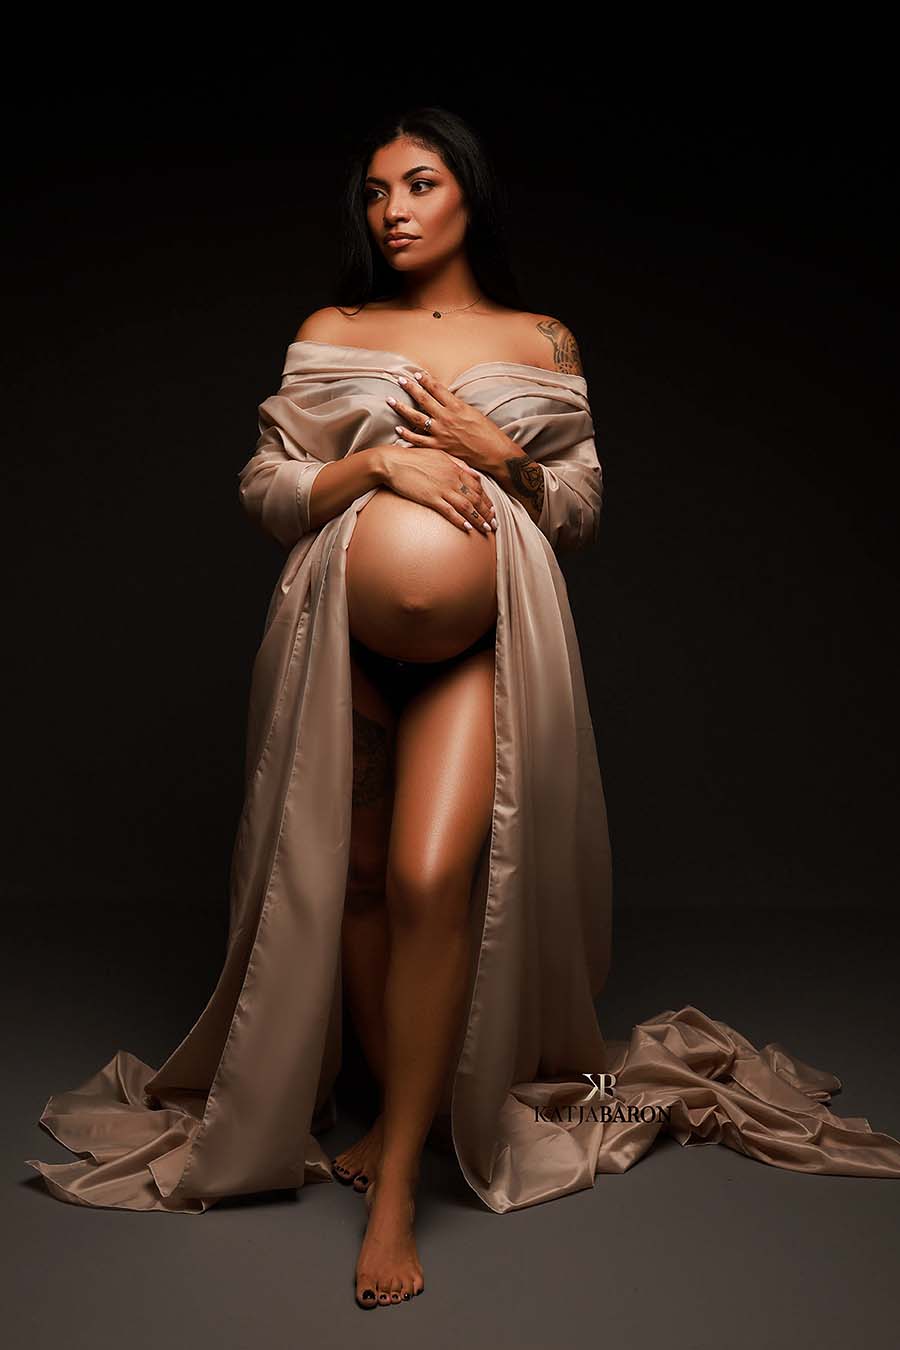 pregnant model poses in a dark studio wearing a sand taffeta scarf covering her chest and leaving her belly uncovered.